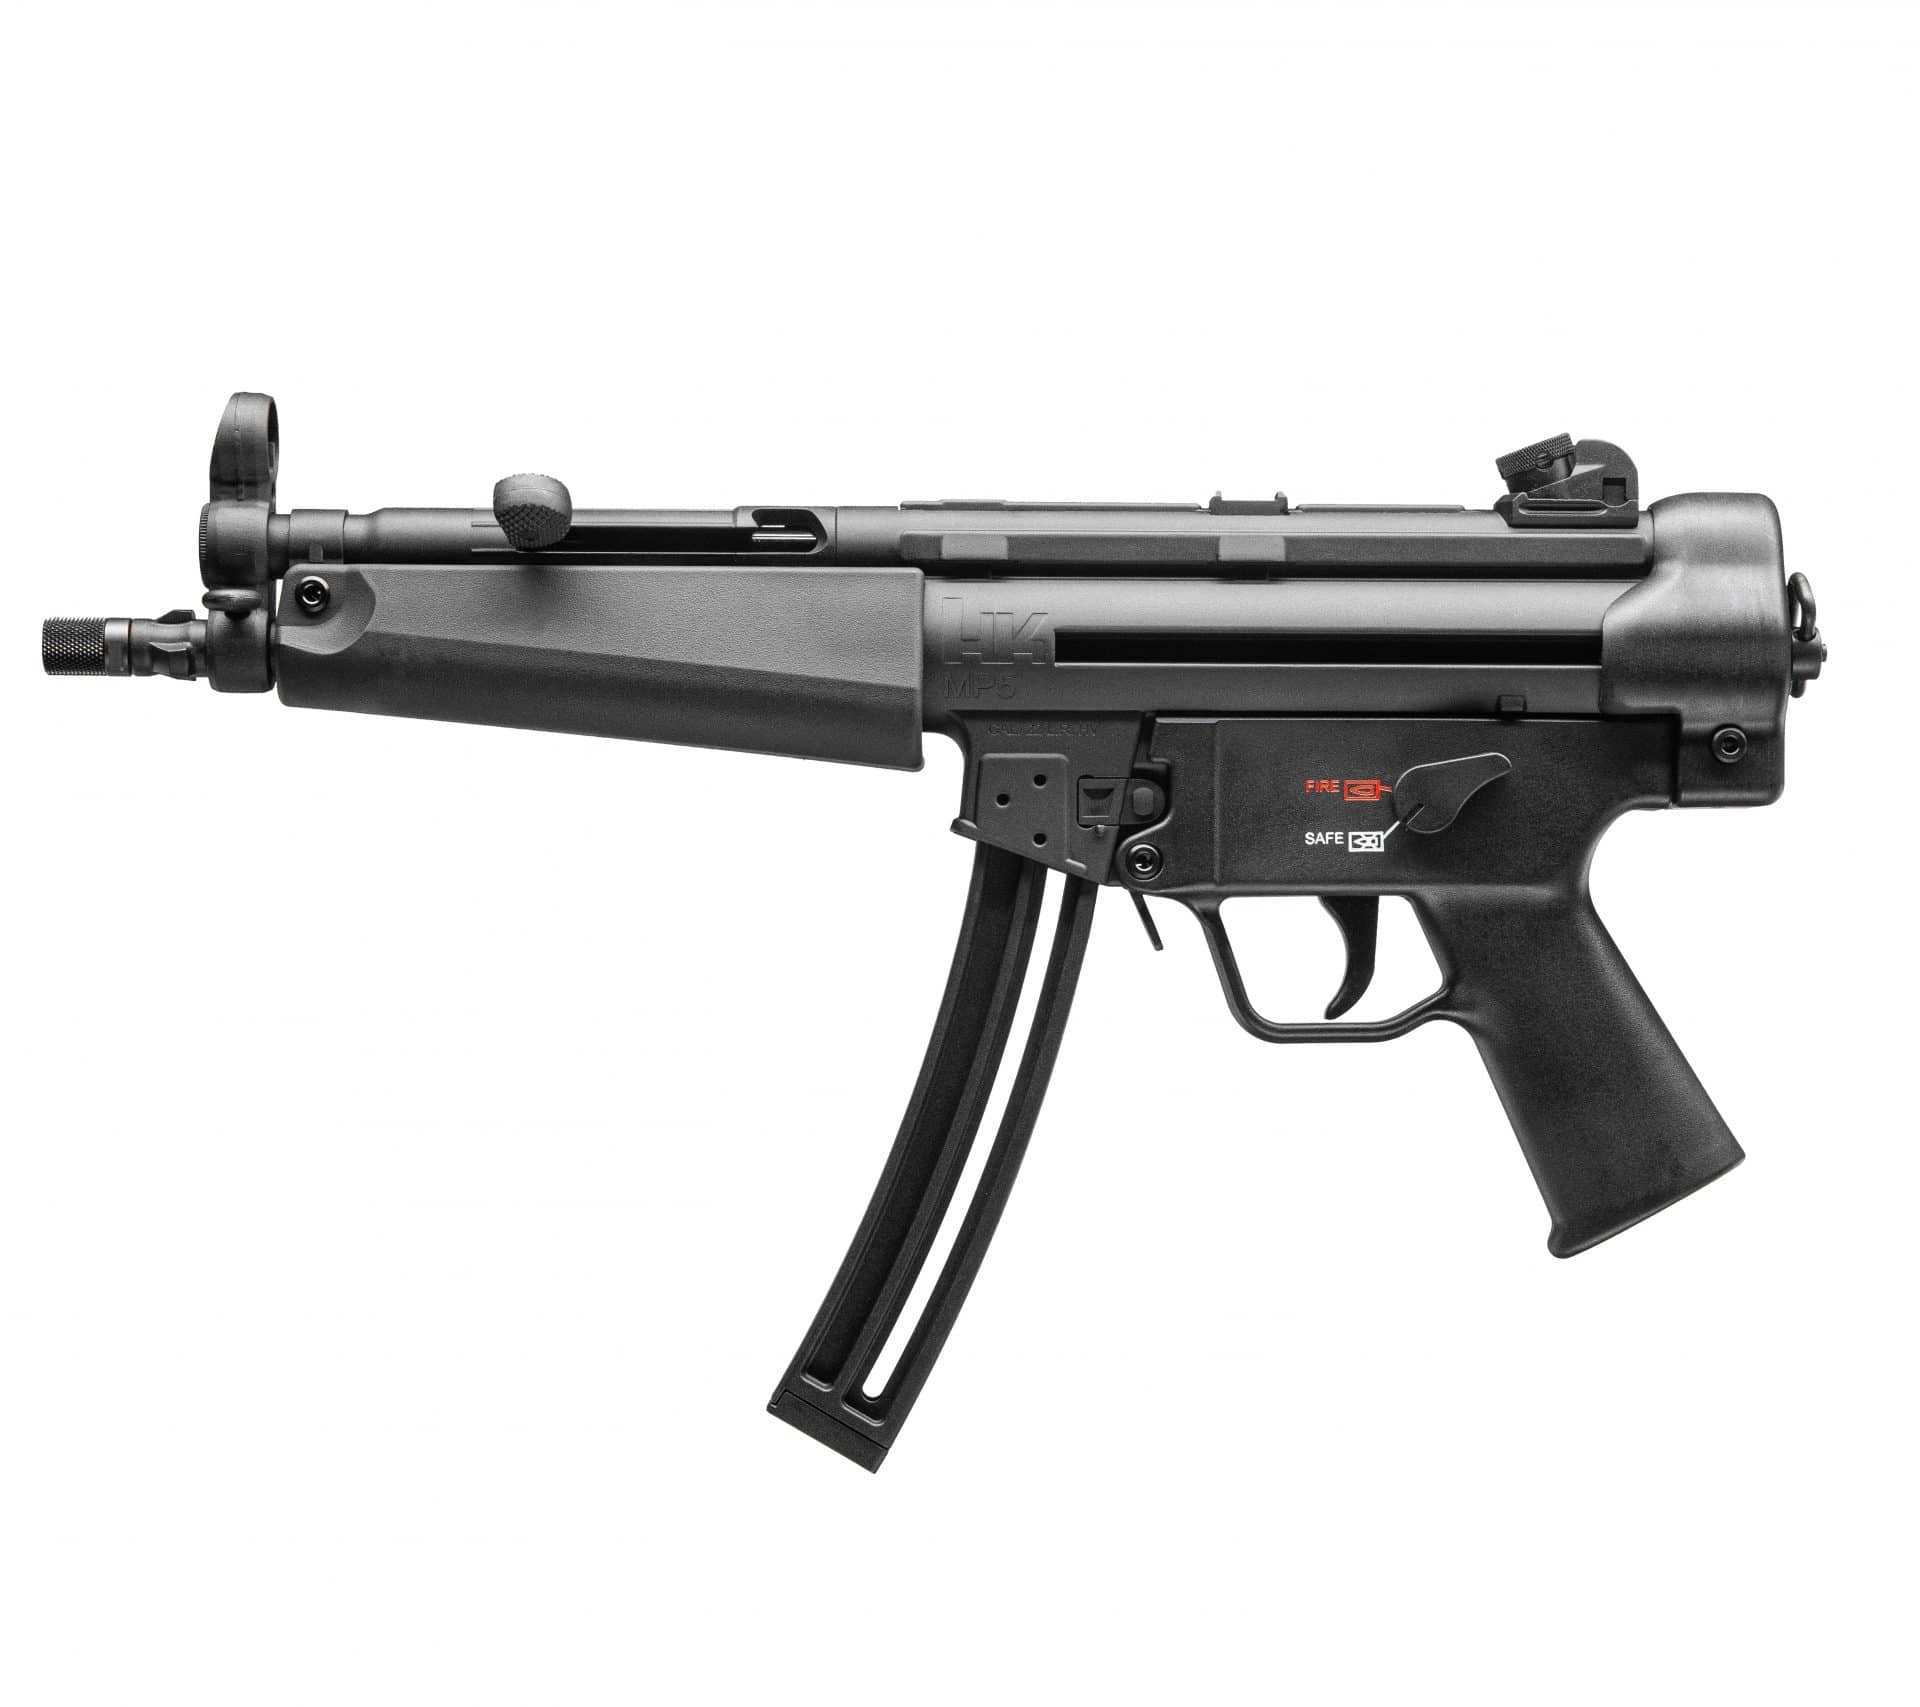 HECKLER and KOCH MP5 For Sale Online - Just Armory